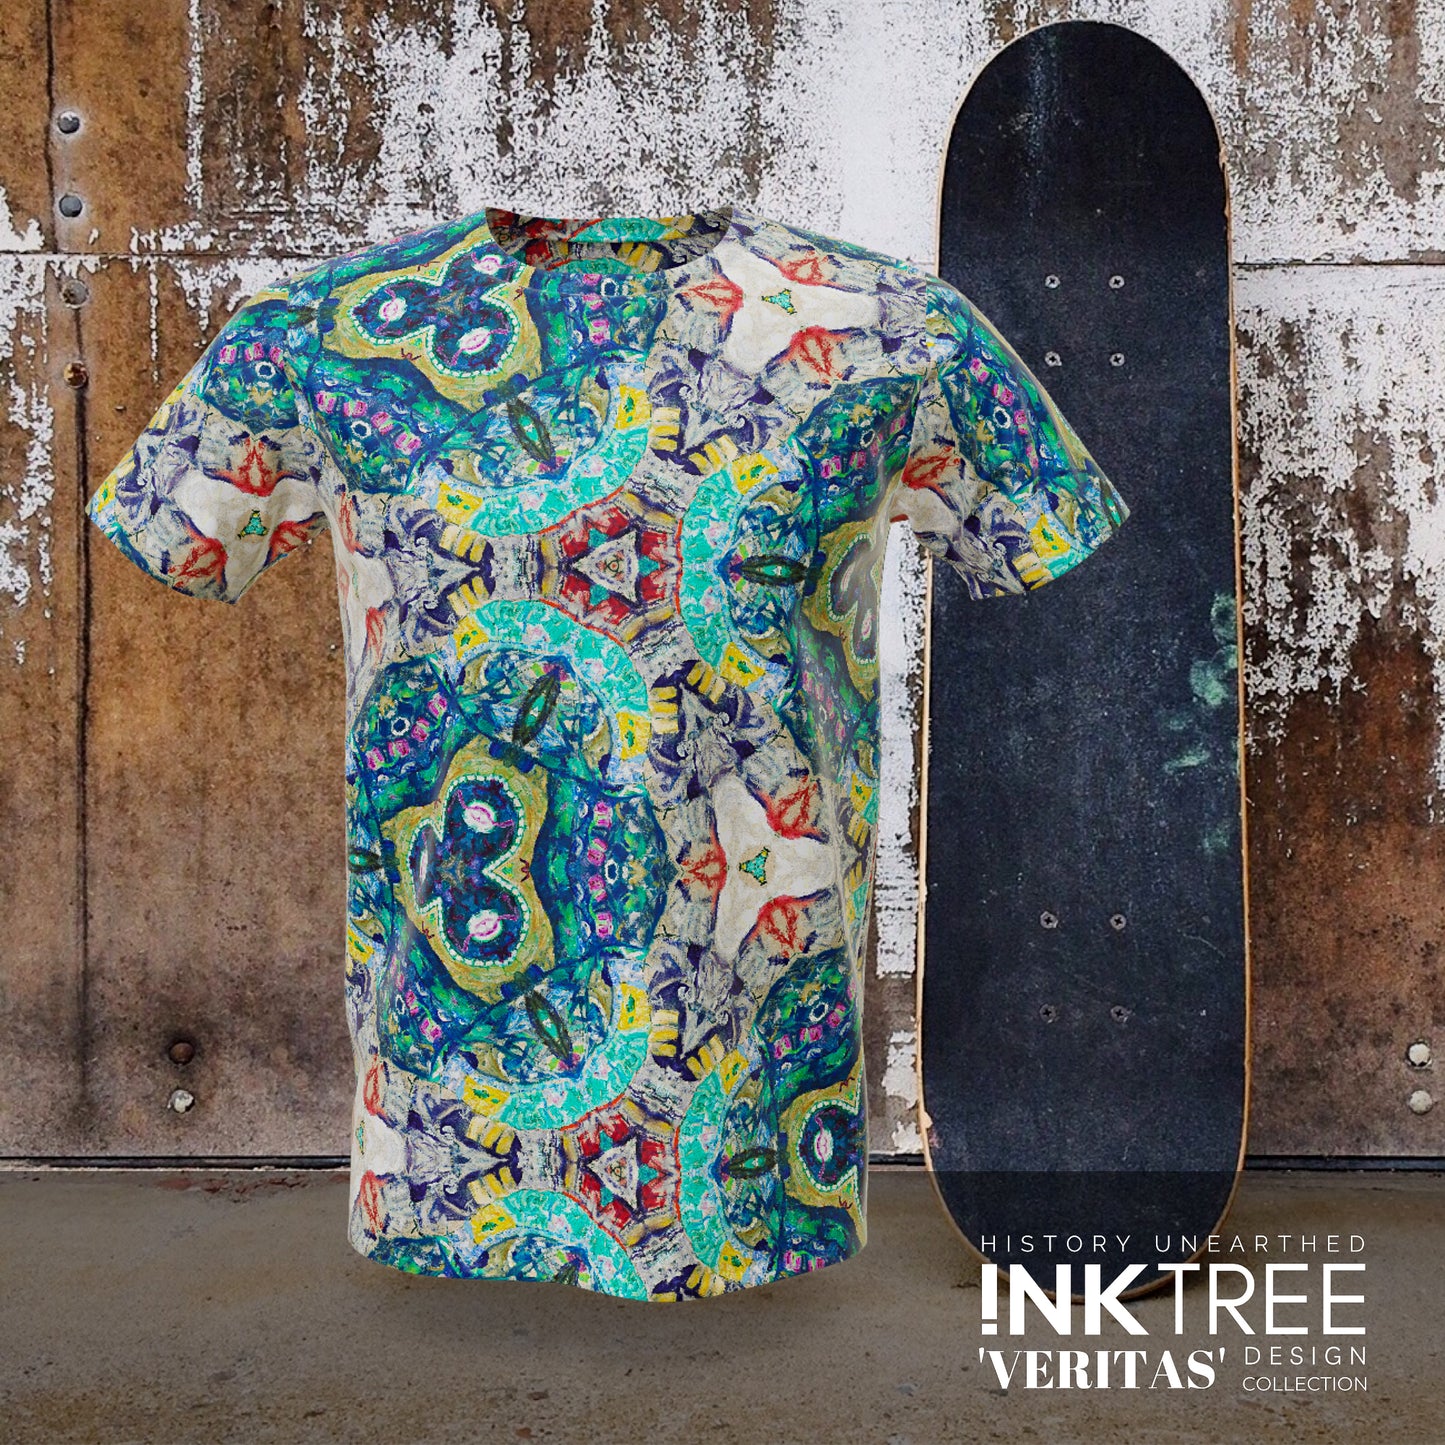 A blue, purple, red and green patterned t'shirt, with a skateboard and rusty wall background.